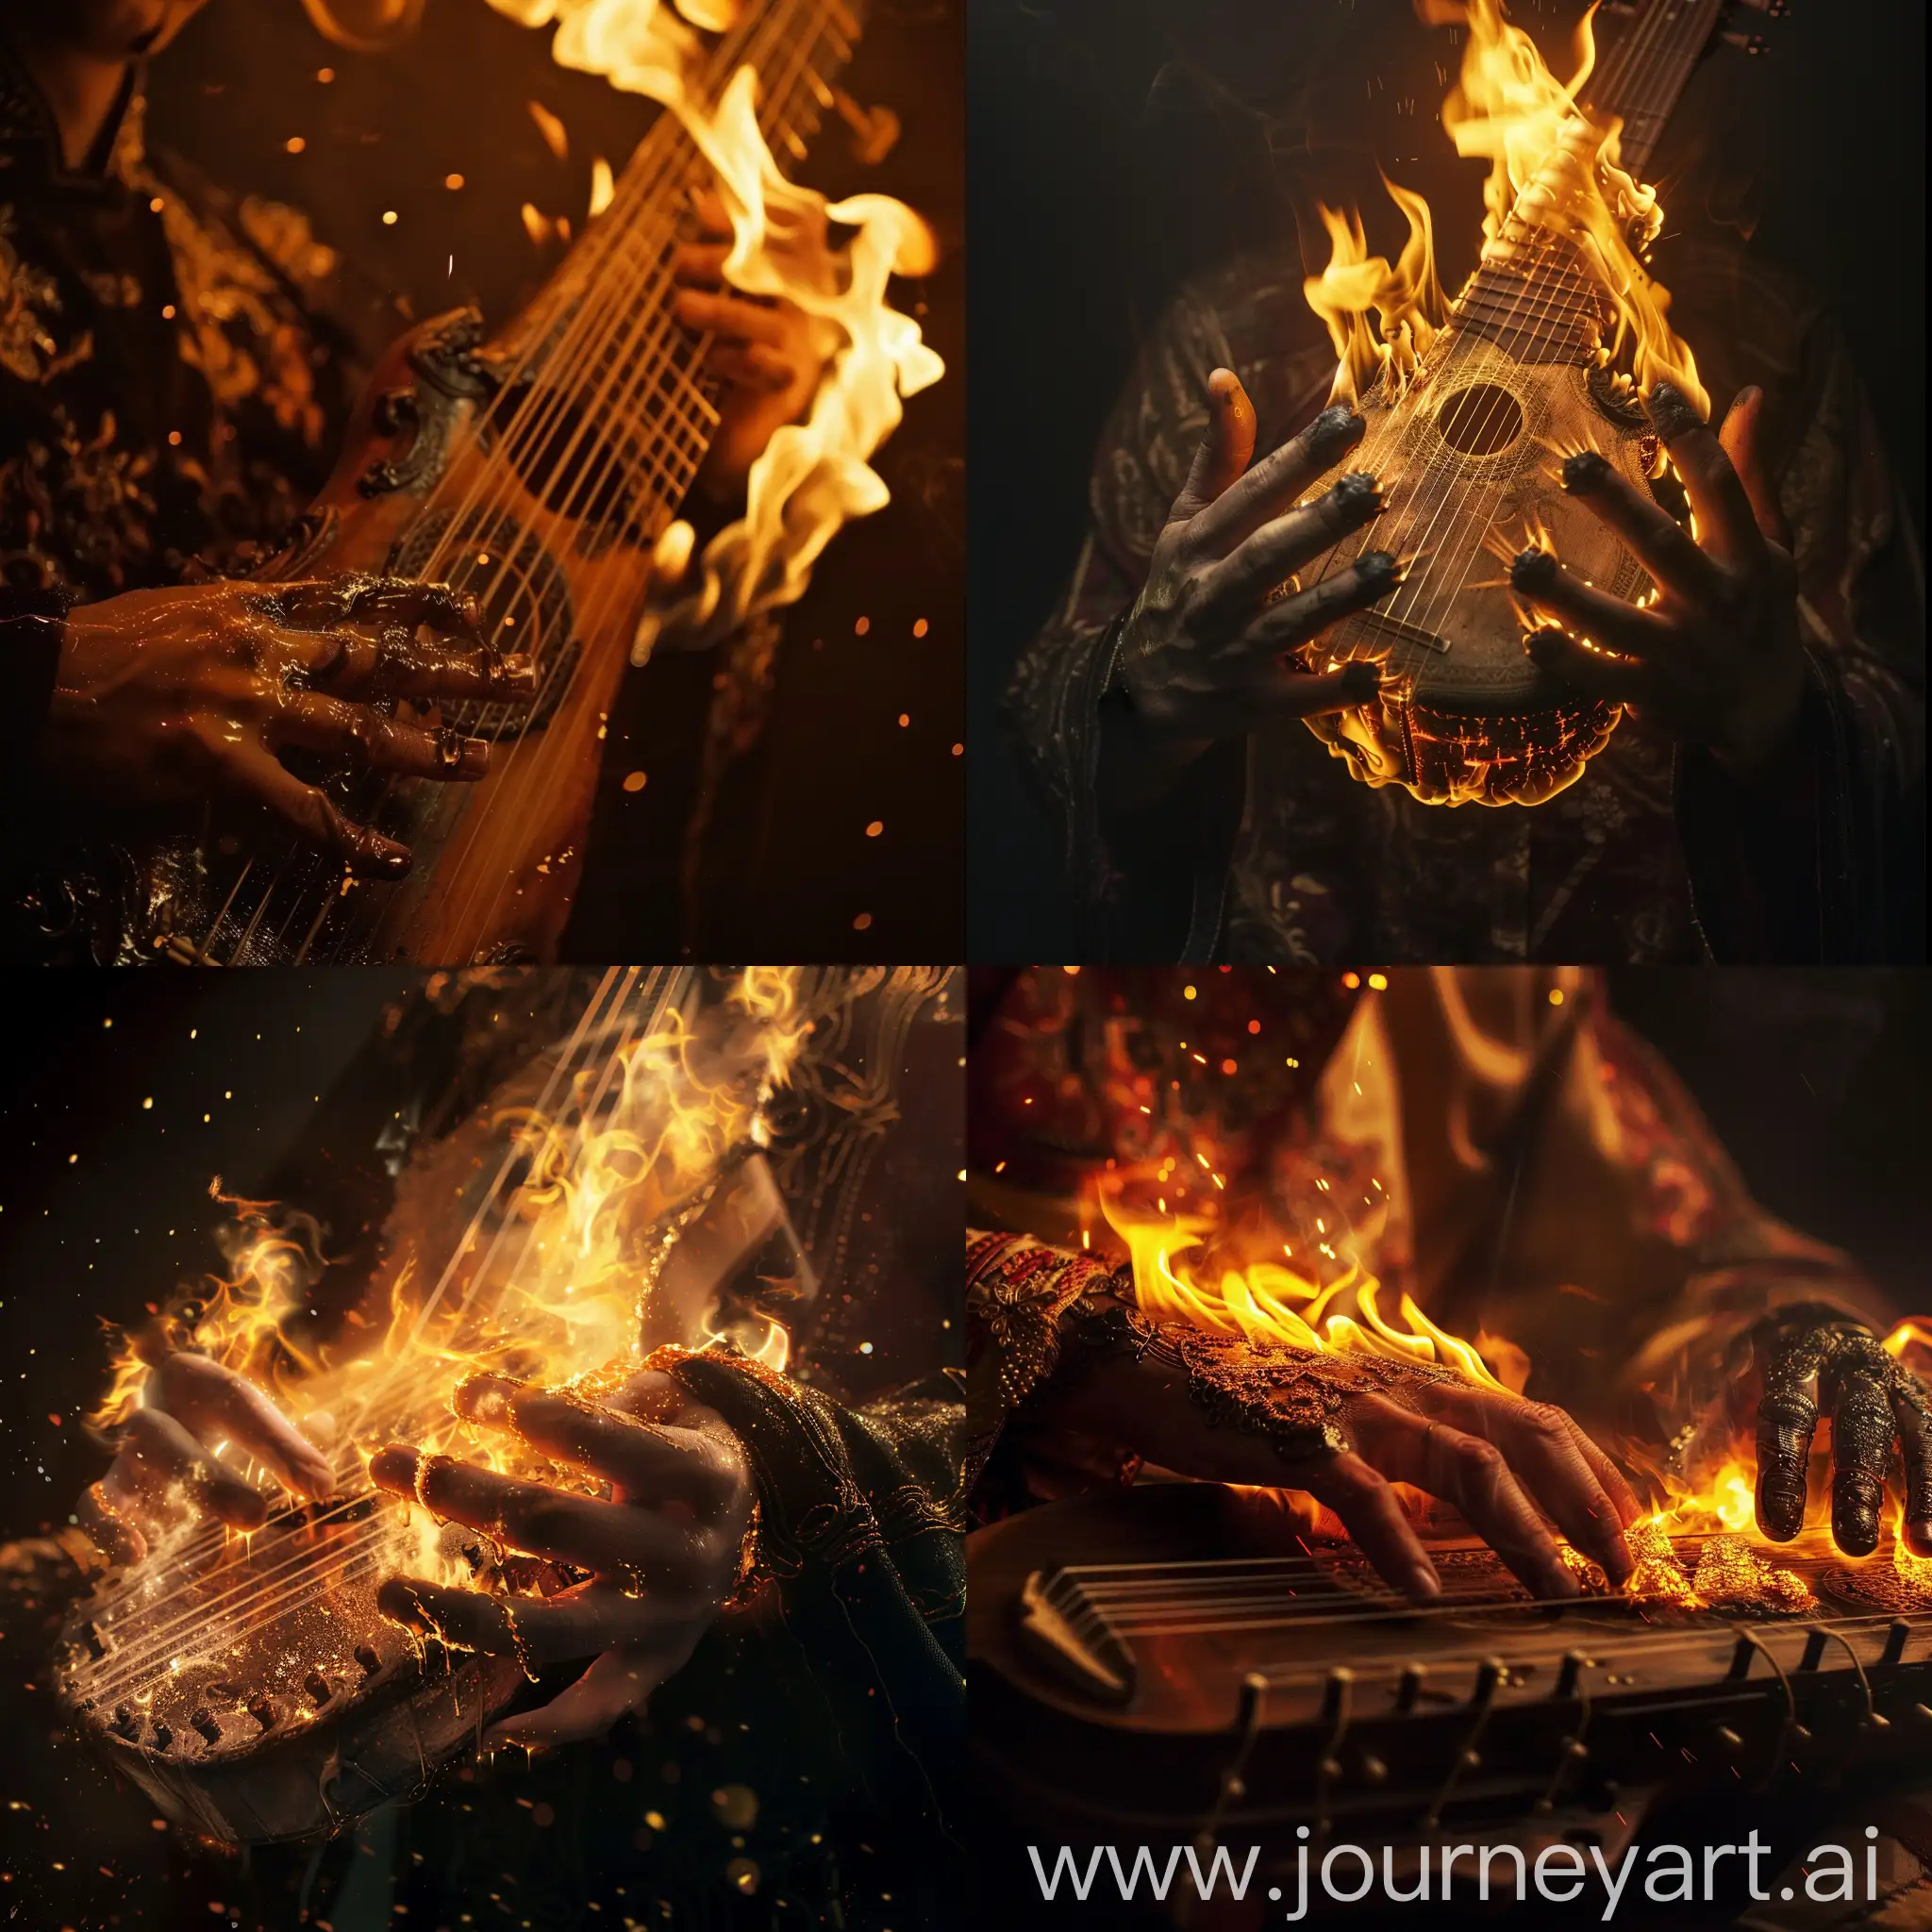 Fiery-Hands-Playing-a-Melting-Musical-Instrument